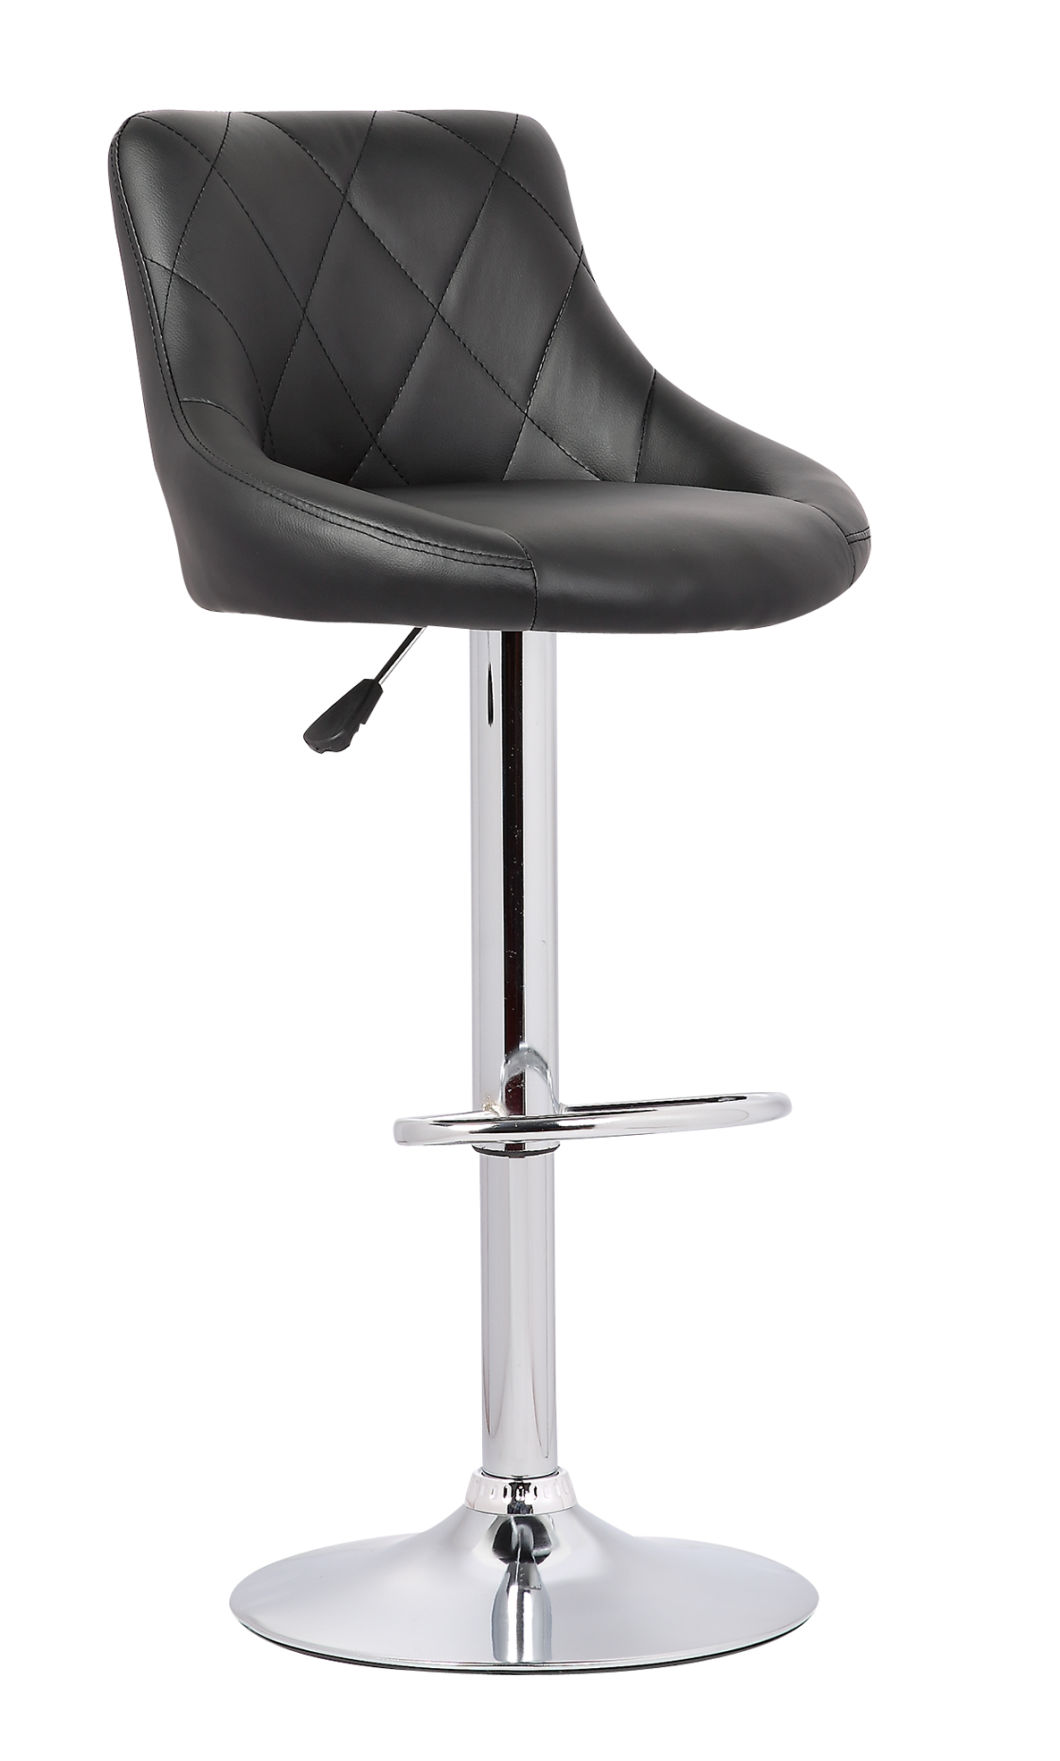 Swivel Barstools Synthetic Leather Rotating Adjustable Height Bar Chair